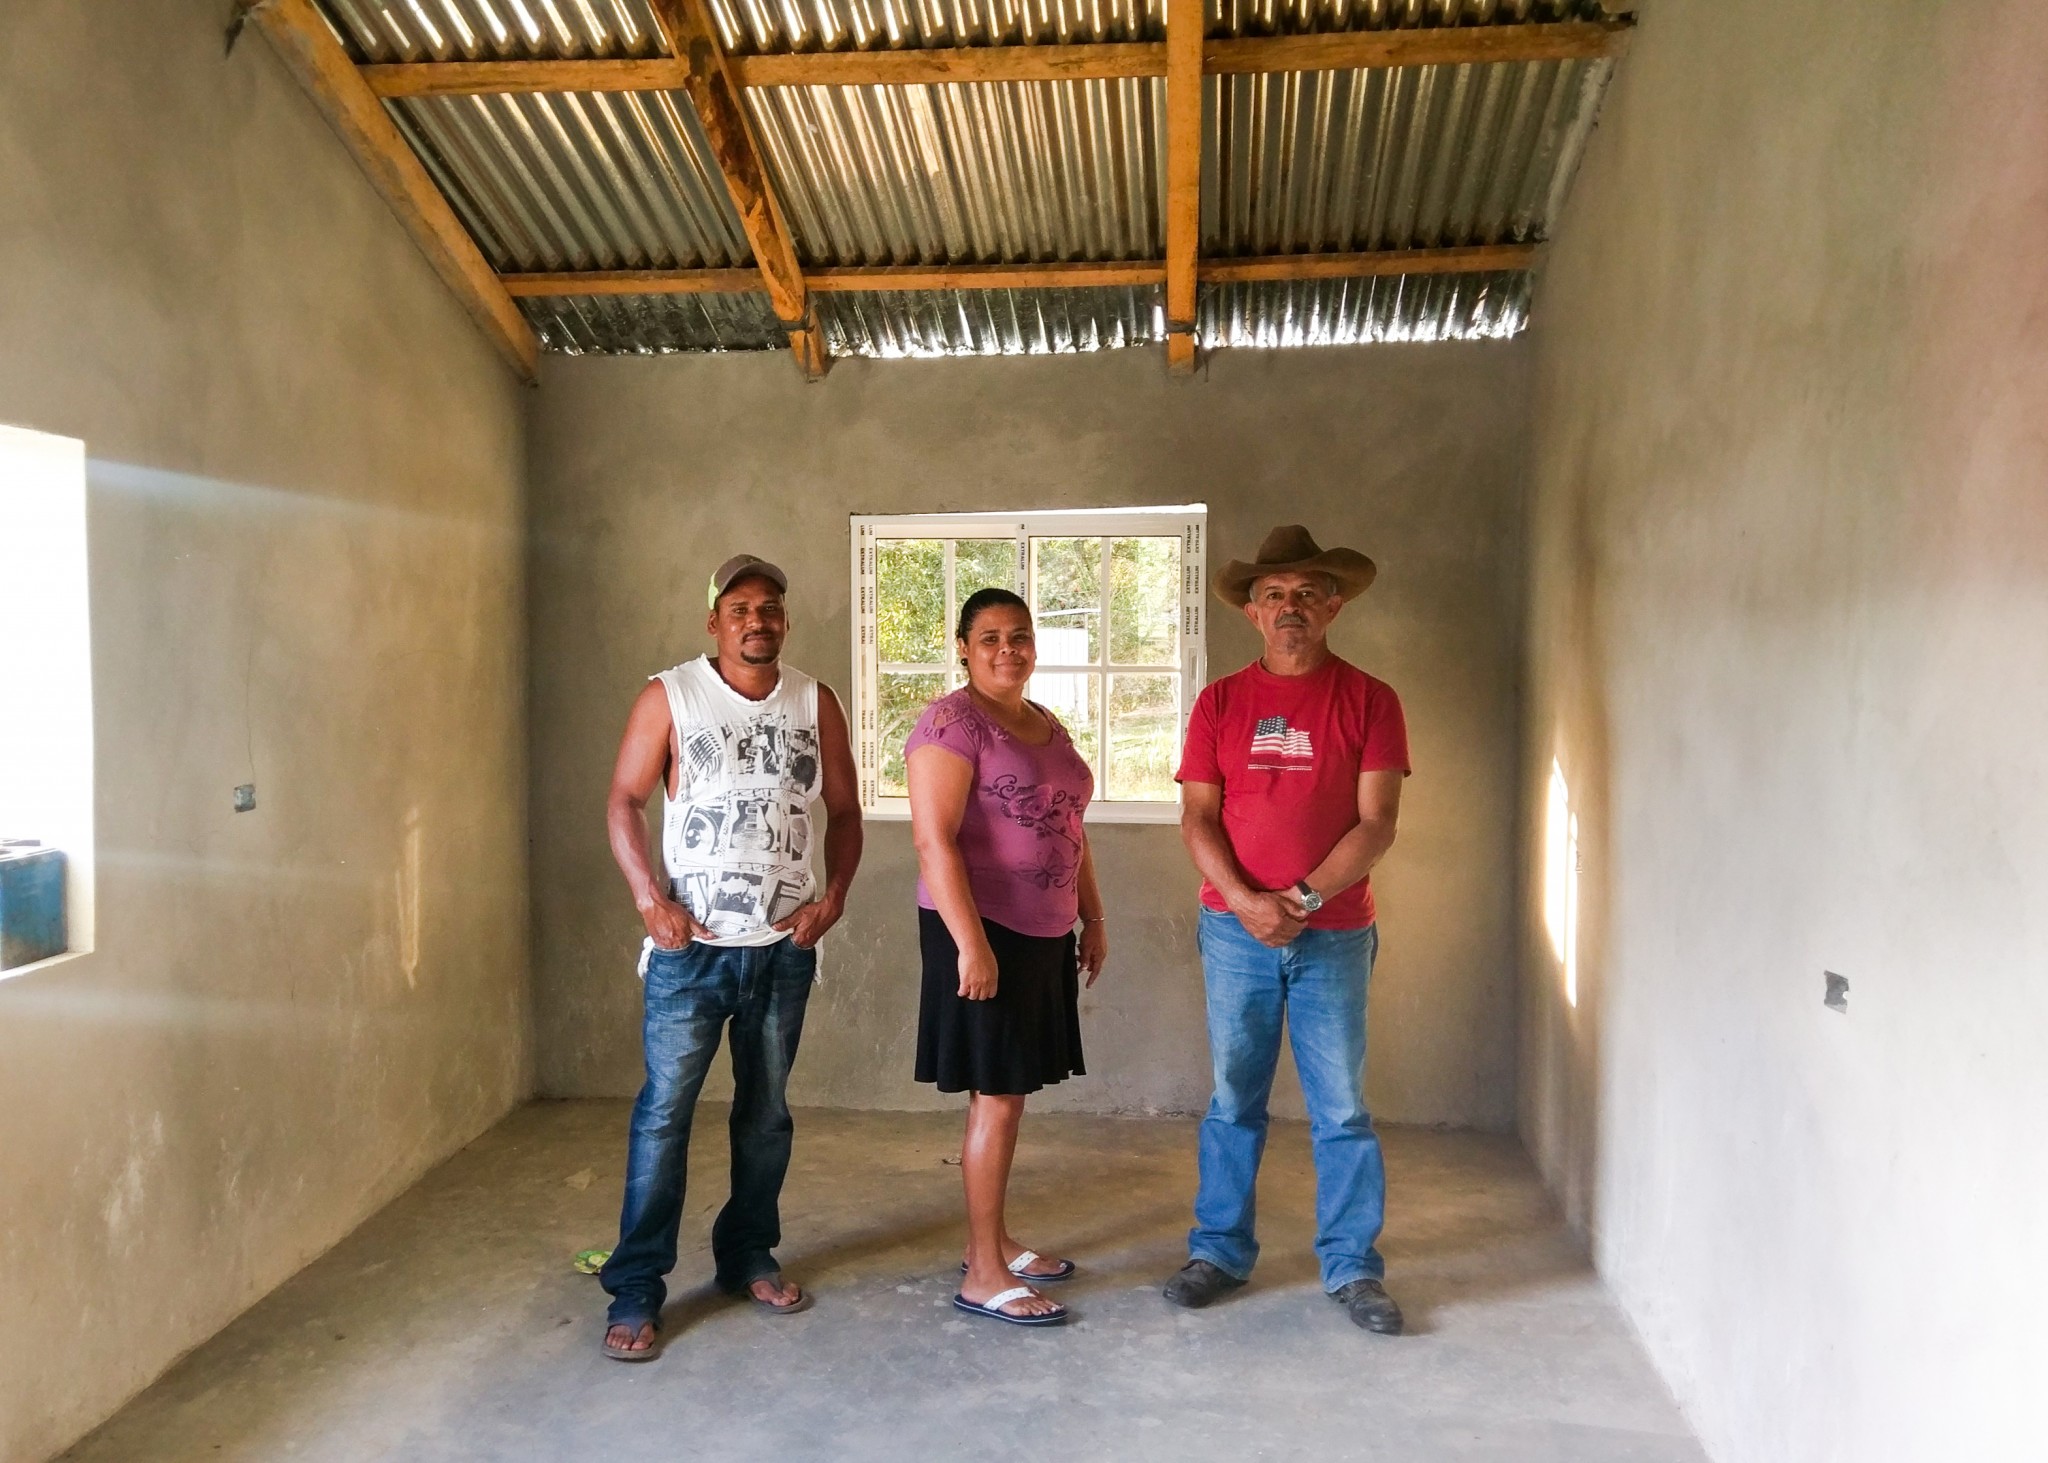 (April) Orica, Honduras-- Roger, Elena and their two kids lived in an unsafe home with walls that exposed the outdoors. Iglecia Centro Americana La Fe served this family by installing new windows, floors, fixing the cracked walls and providing electricity! The couple was not open to hearing the gospel message before the construction but during the project the pastor was able to share with Jesus’ love with them. They now accept visits from the pastor and are building a relationship with their local church.